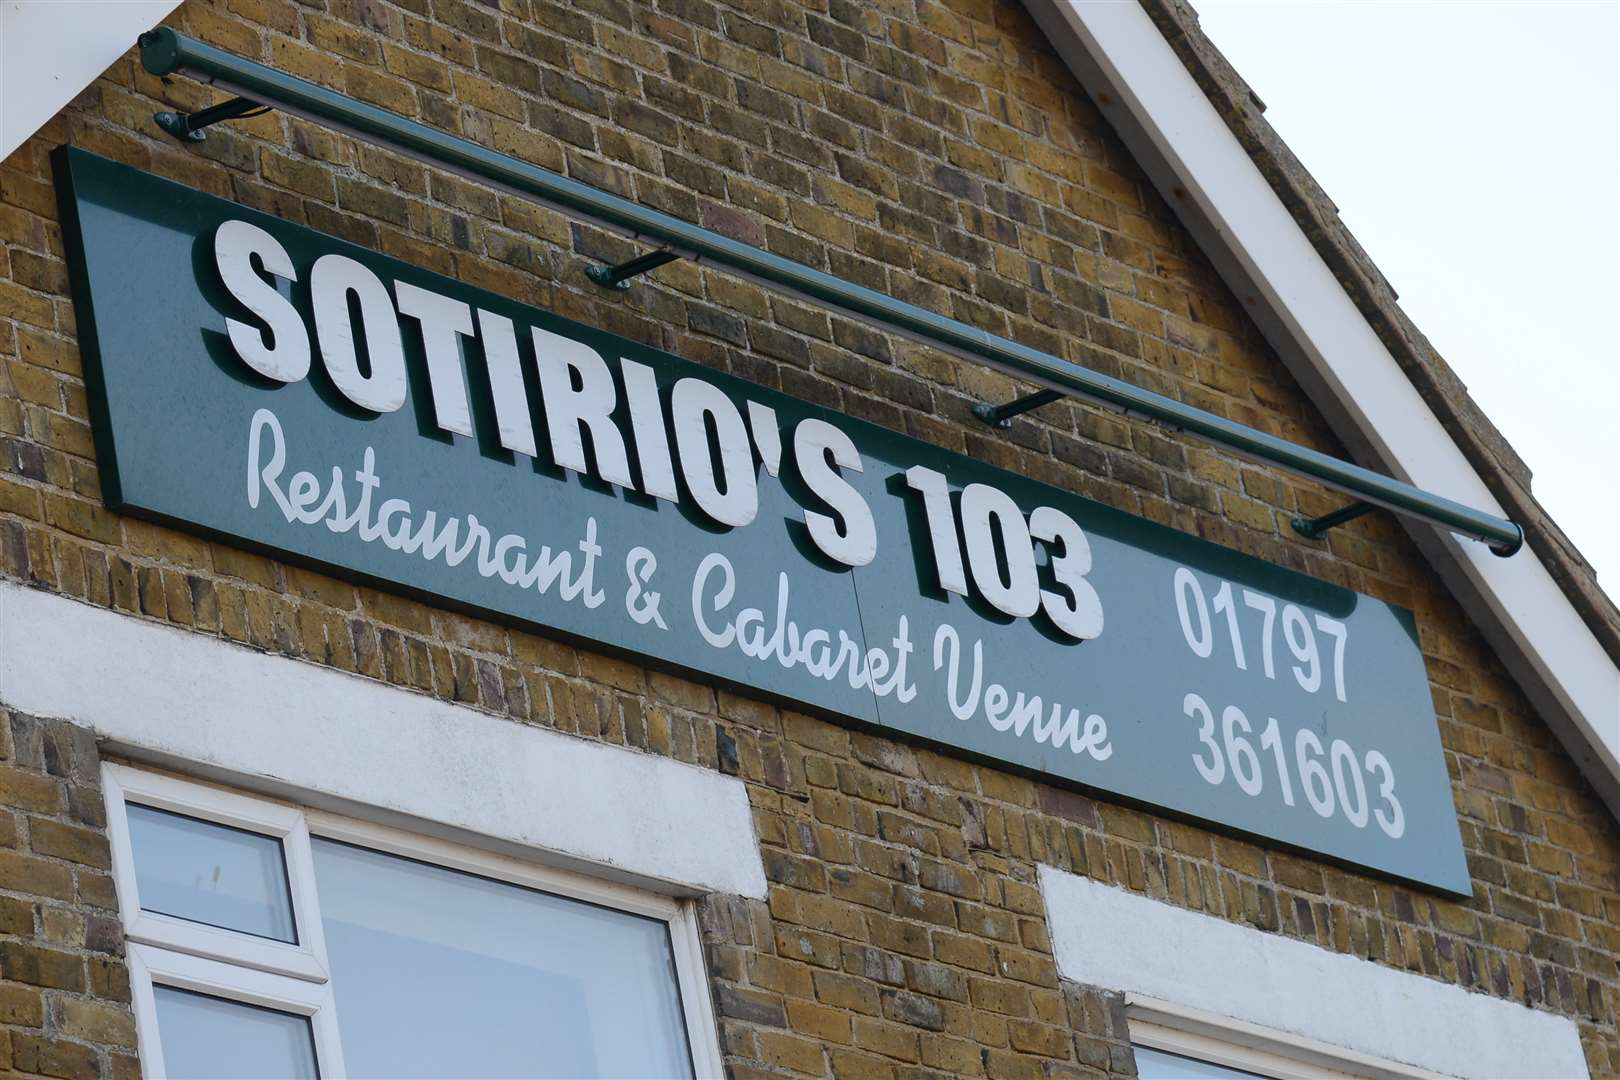 Sour note for Beatles classic: Sotirio's 103 restaurant in Greatstone.